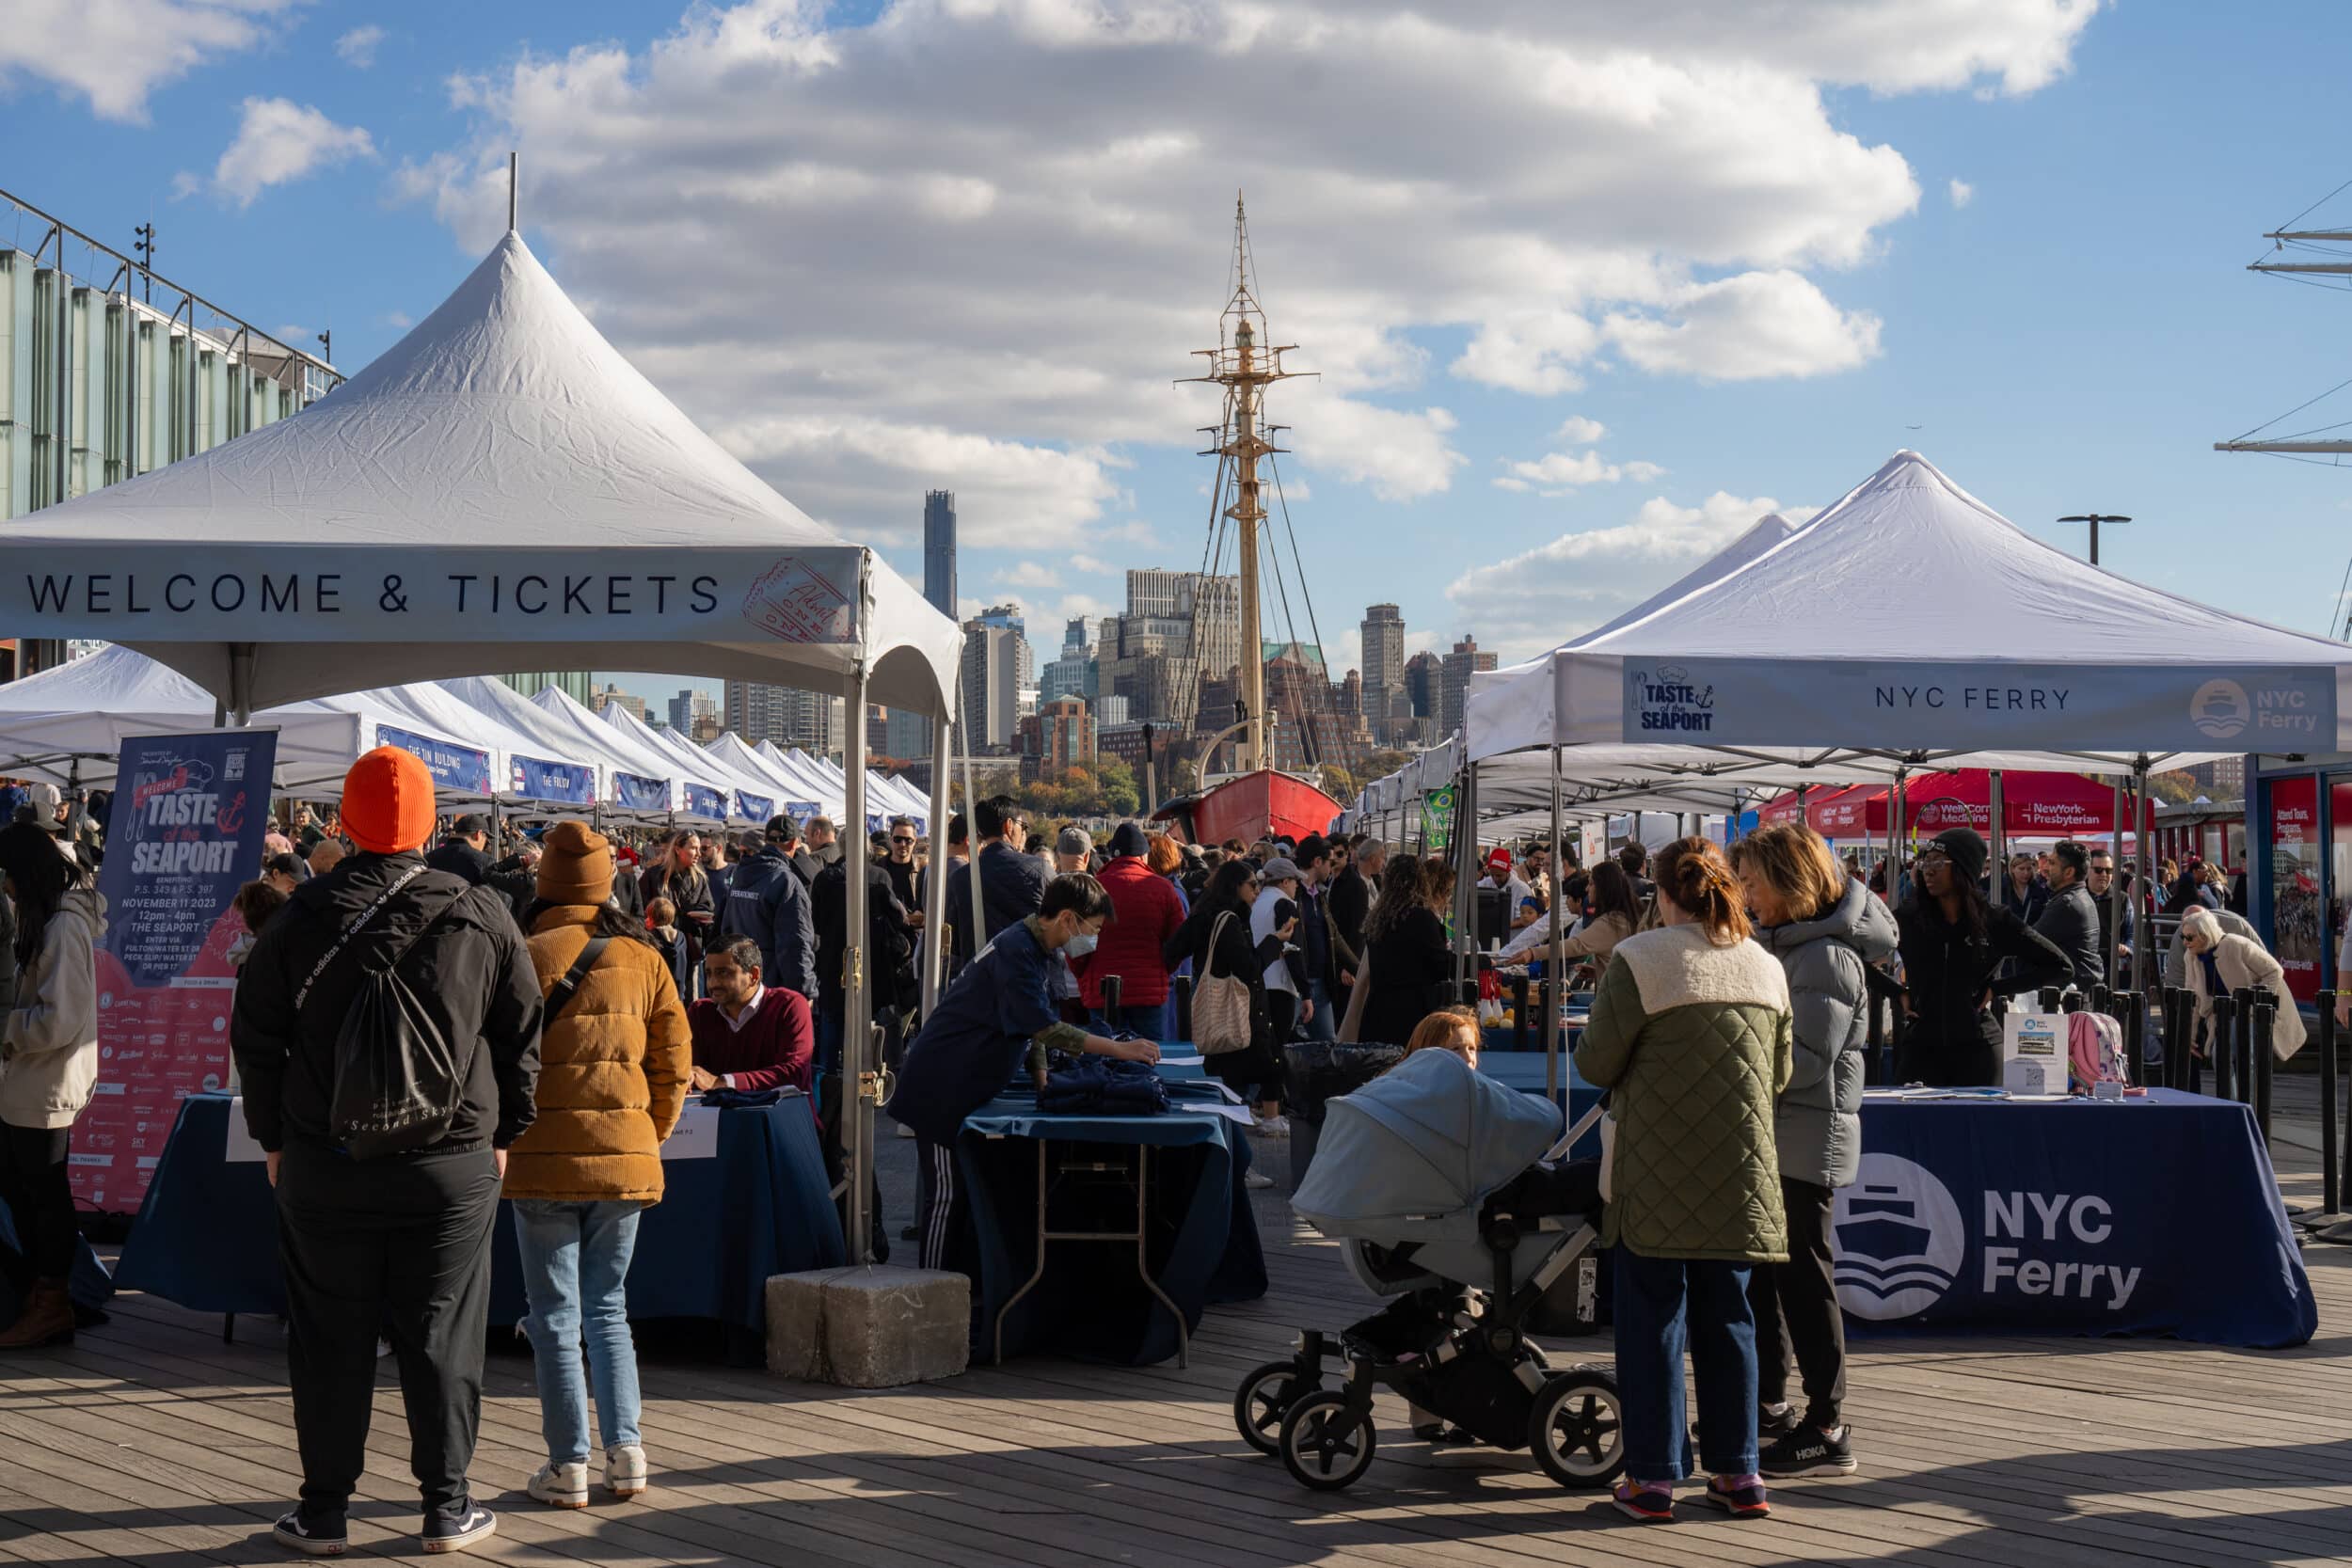 How Taste of the Seaport Helps Local Kids